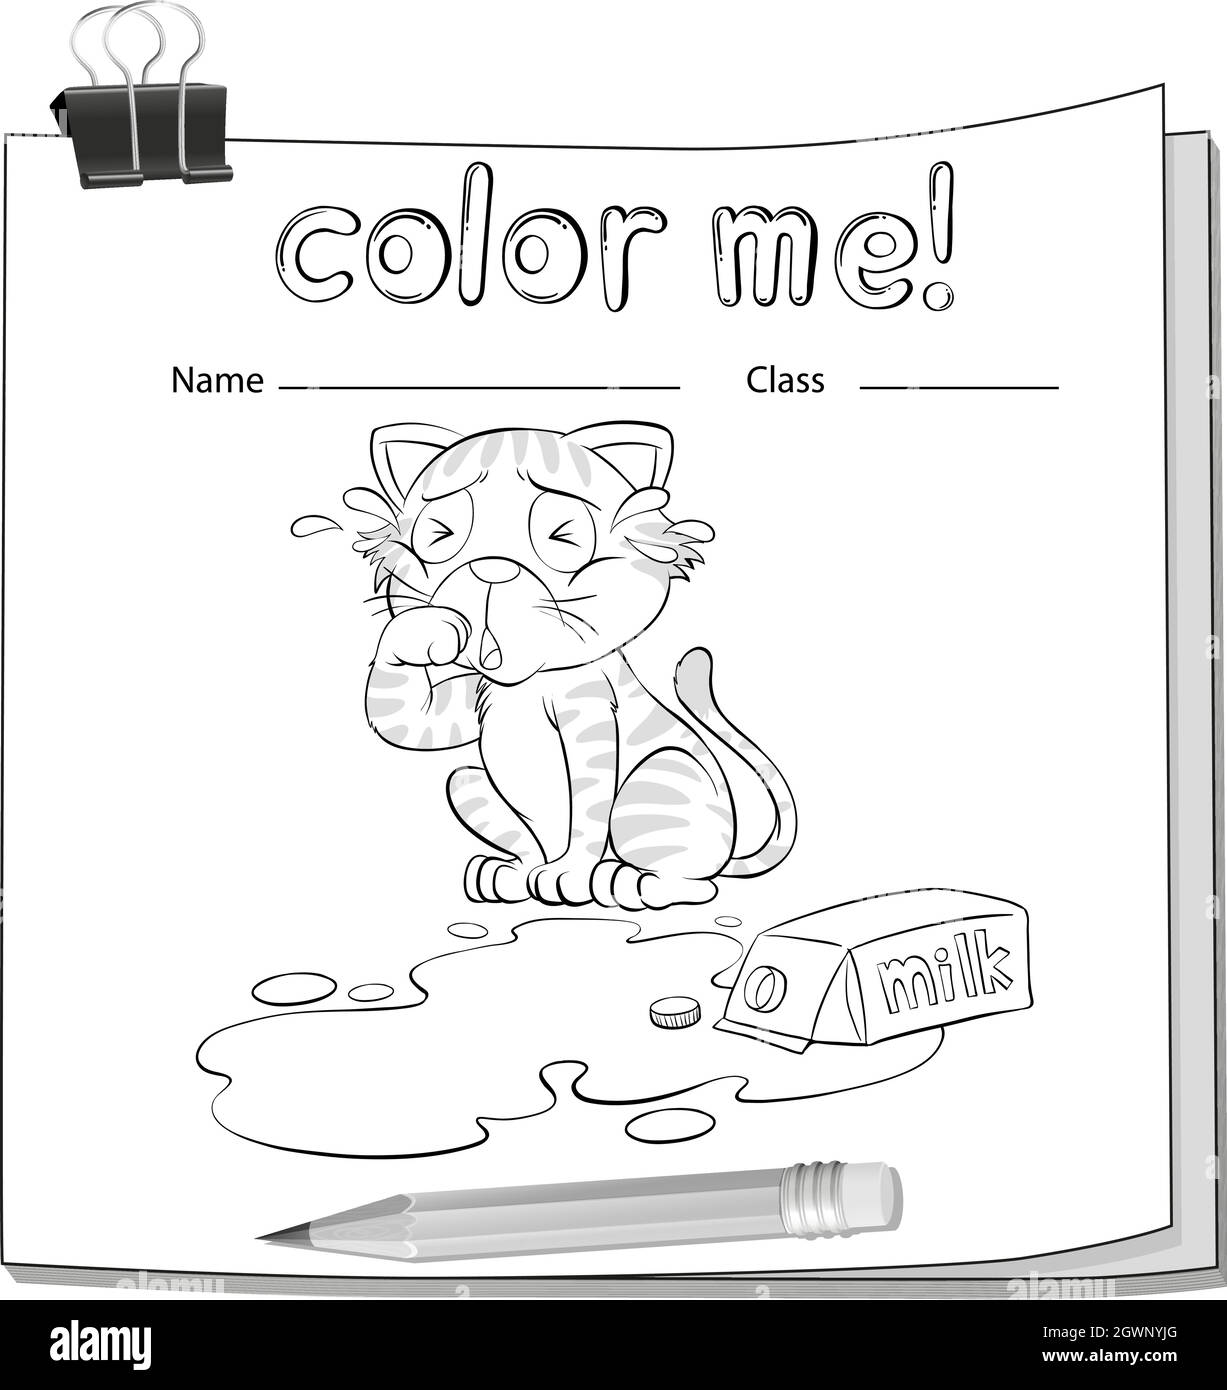 Coloring worksheet with a crying cat Stock Vector